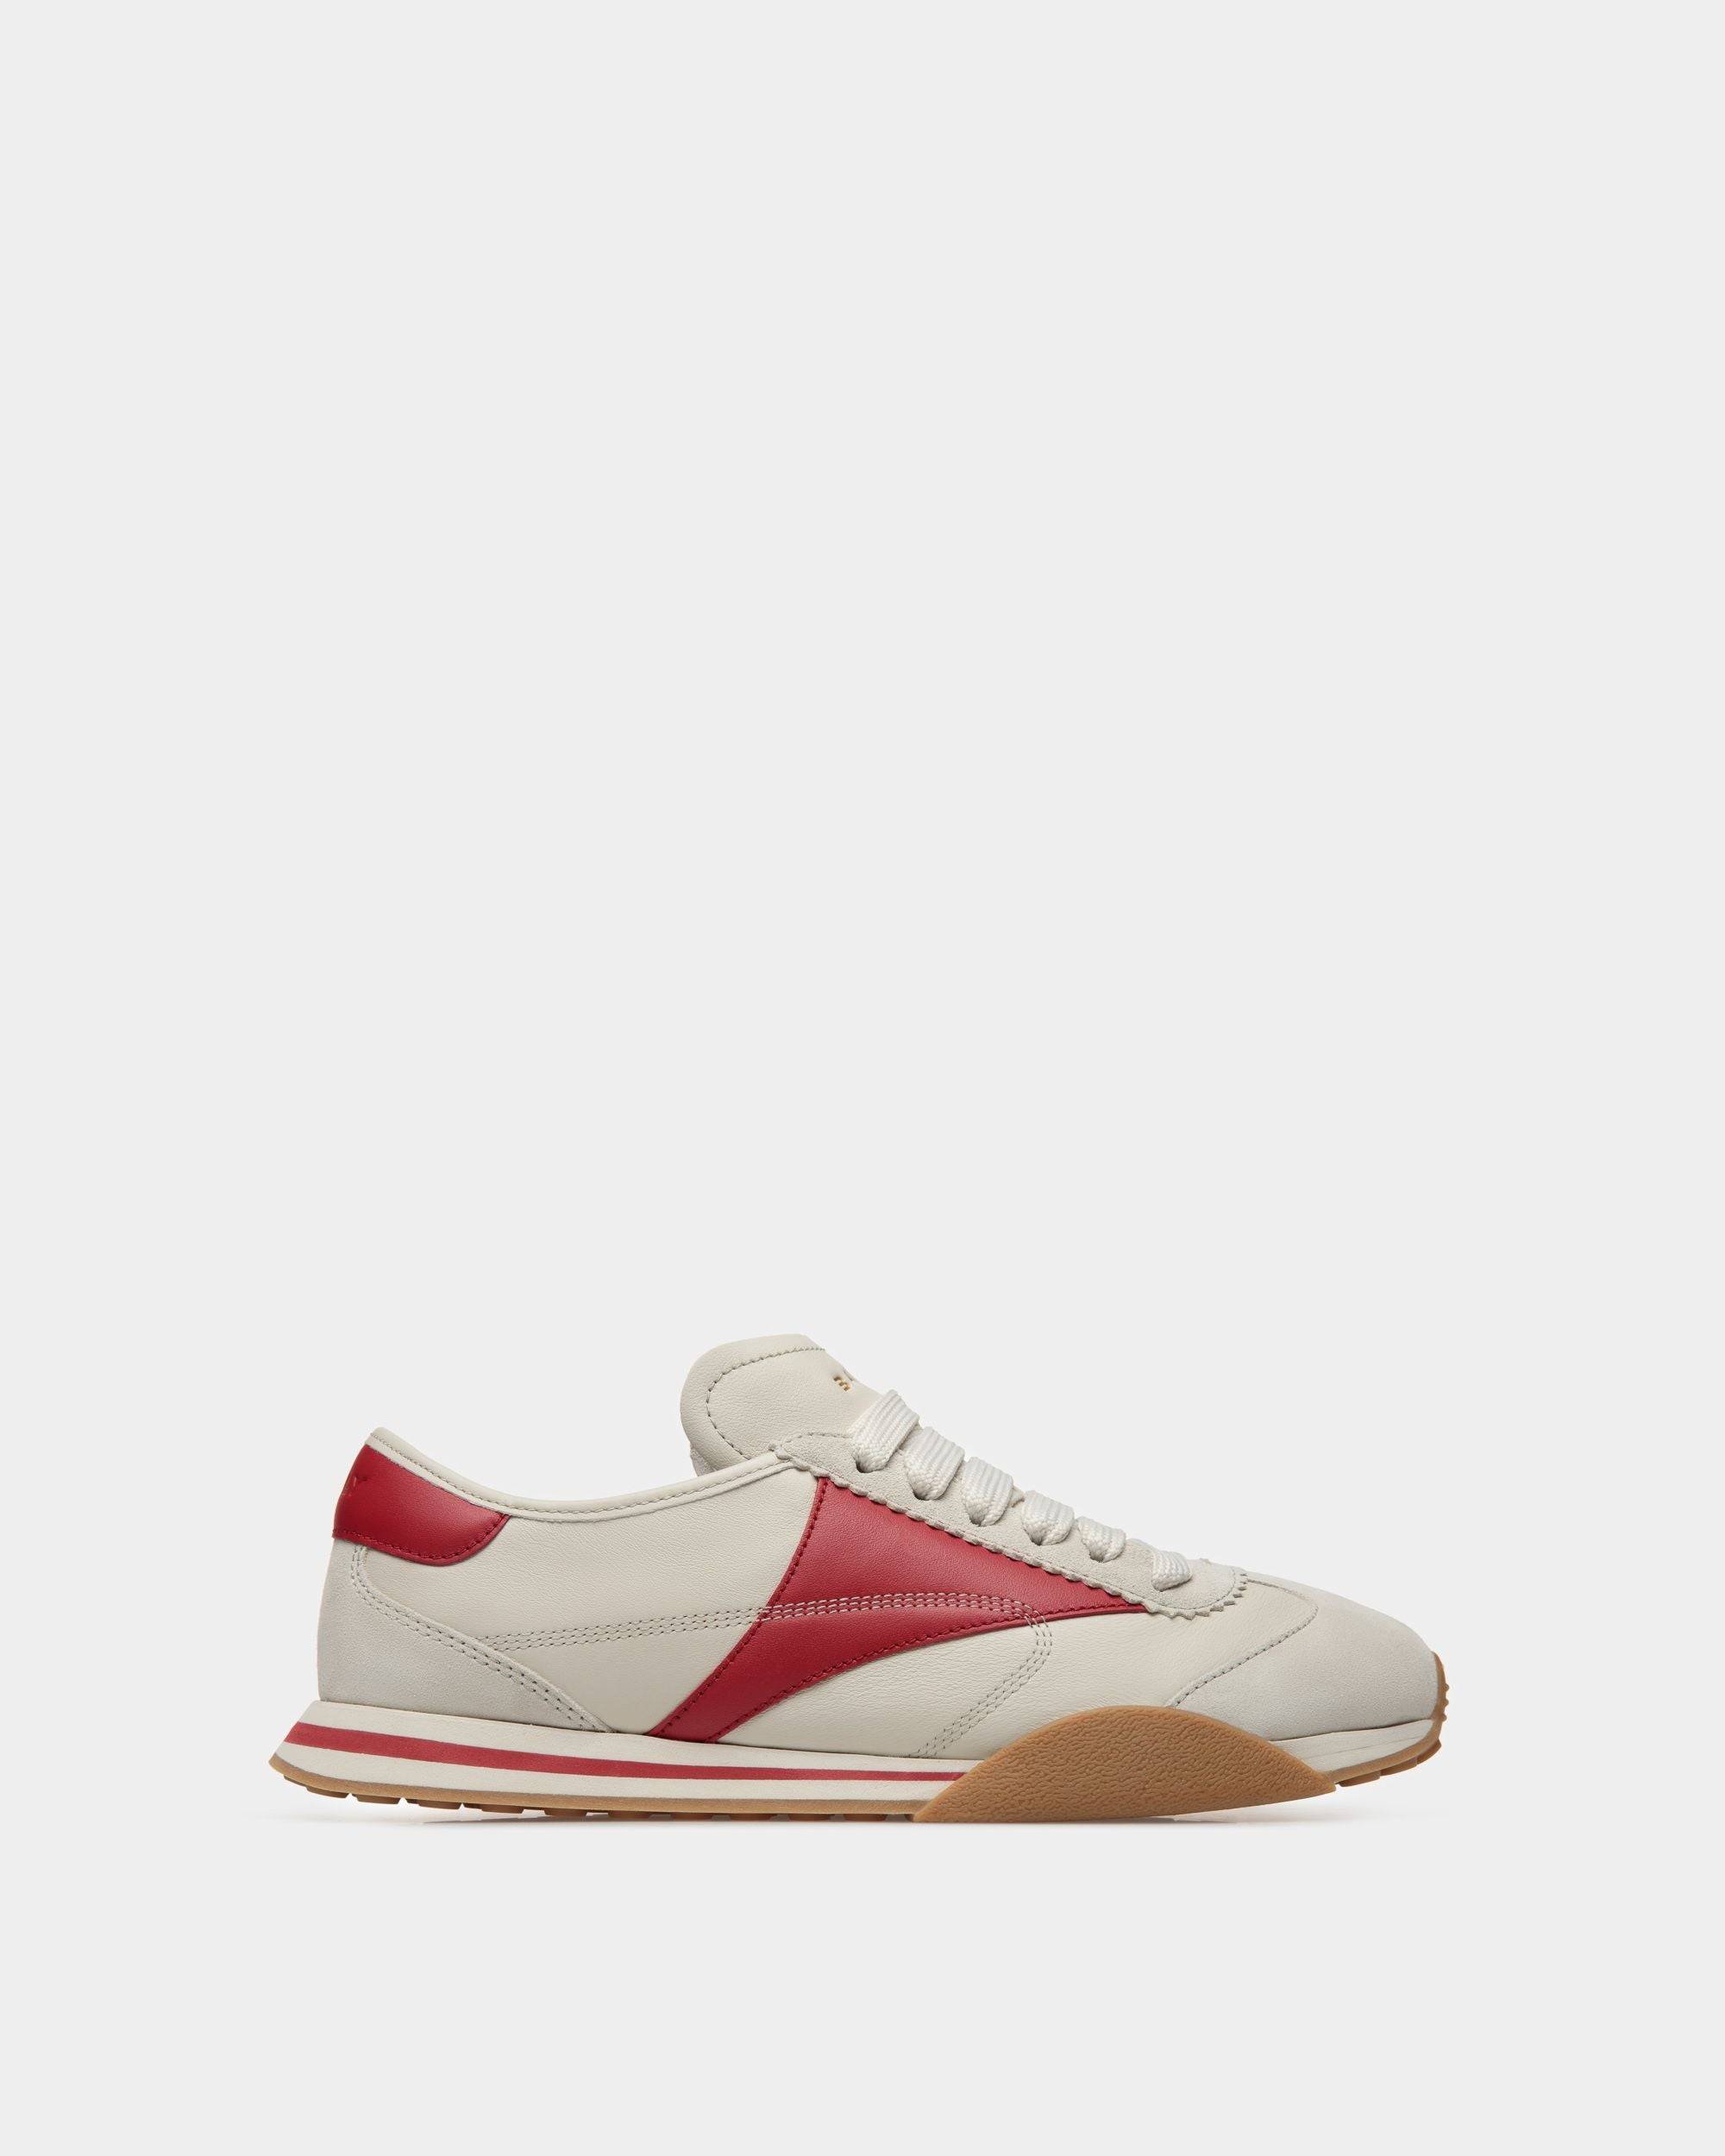 Men's Sussex Sneakers In Dusty White And Deep Ruby Leather | Bally | Still Life Side